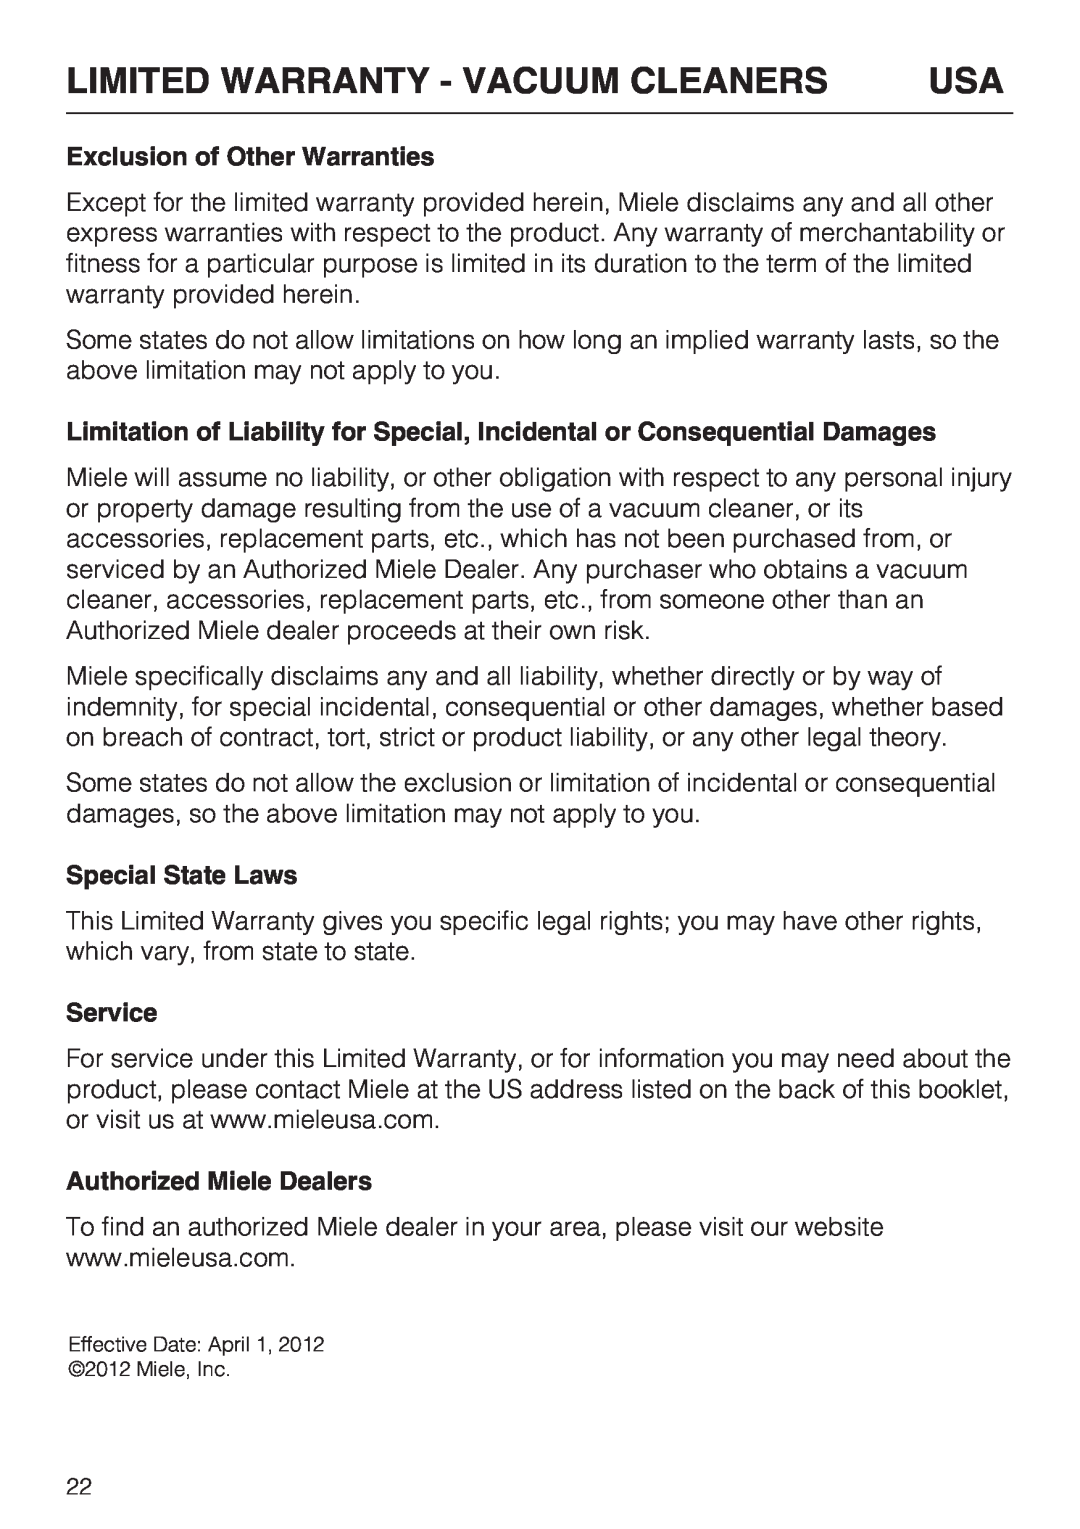 Miele HS08, M-NR09753 090 Exclusion of Other Warranties, Special State Laws, Service, Authorized Miele Dealers 